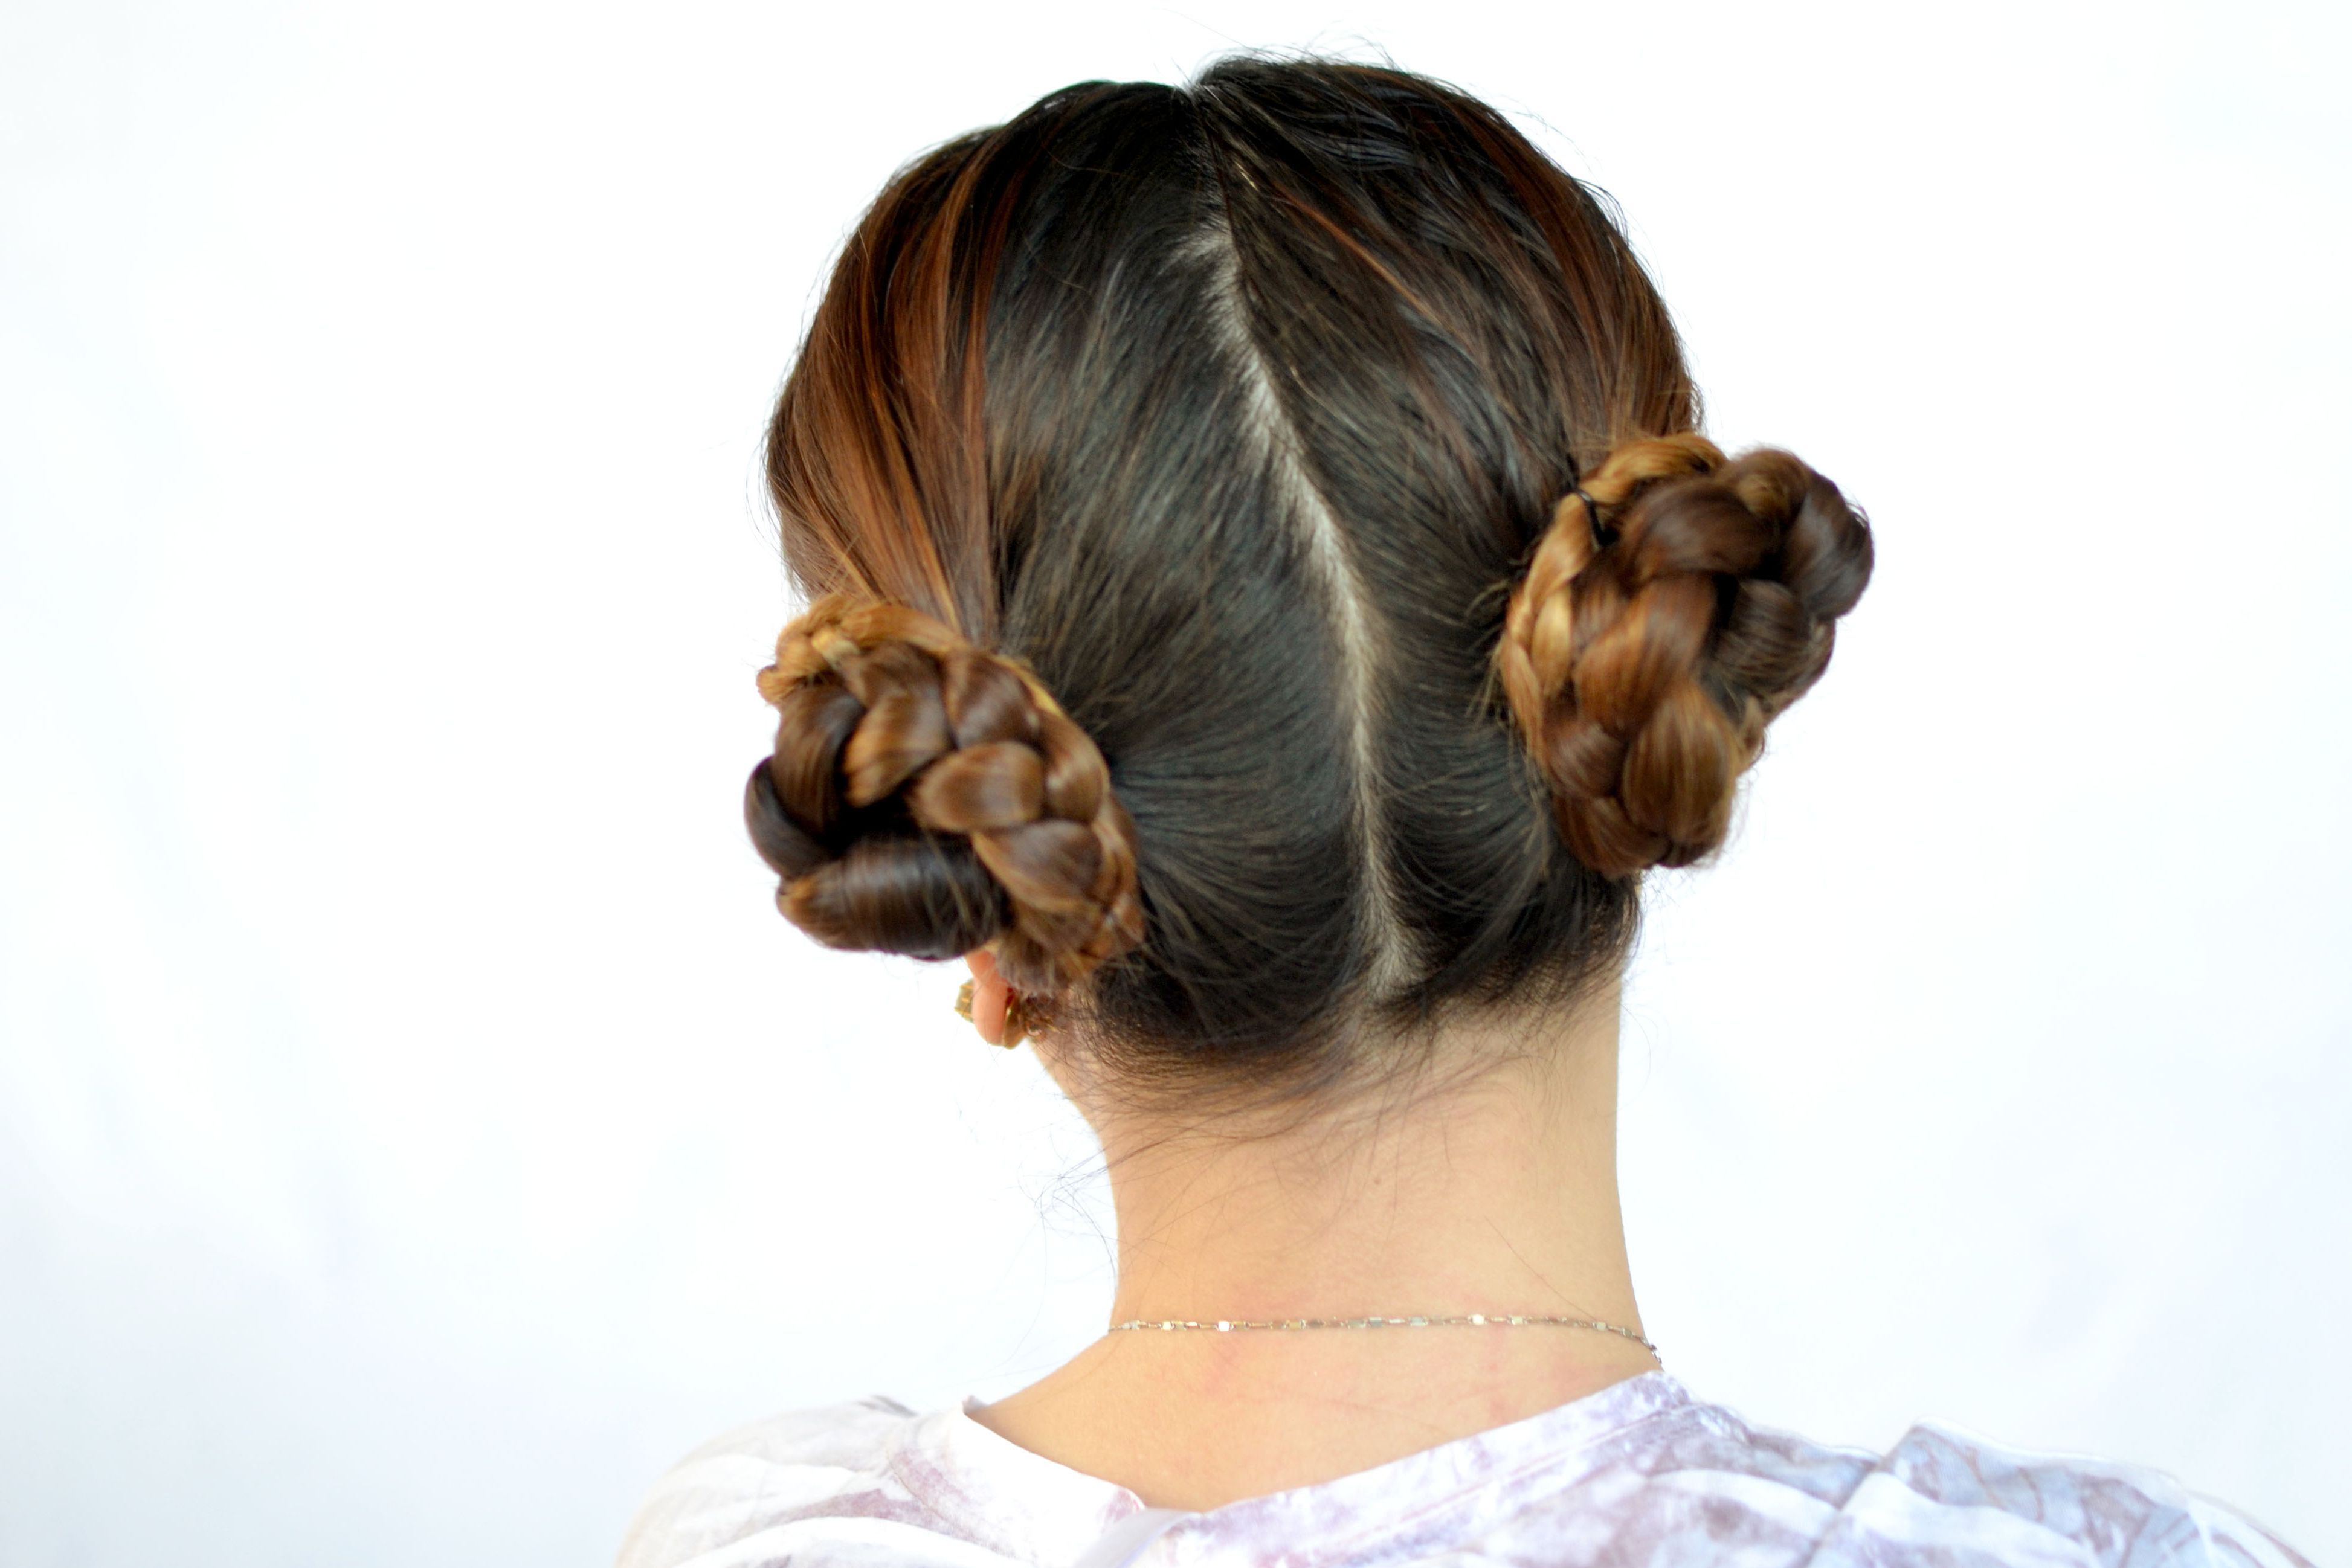 3 Ways To Create A Braided Cinnamon Bun Hairstyle – Wikihow With Regard To Most Recently Released Cinnamon Bun Braided Hairstyles (View 1 of 20)